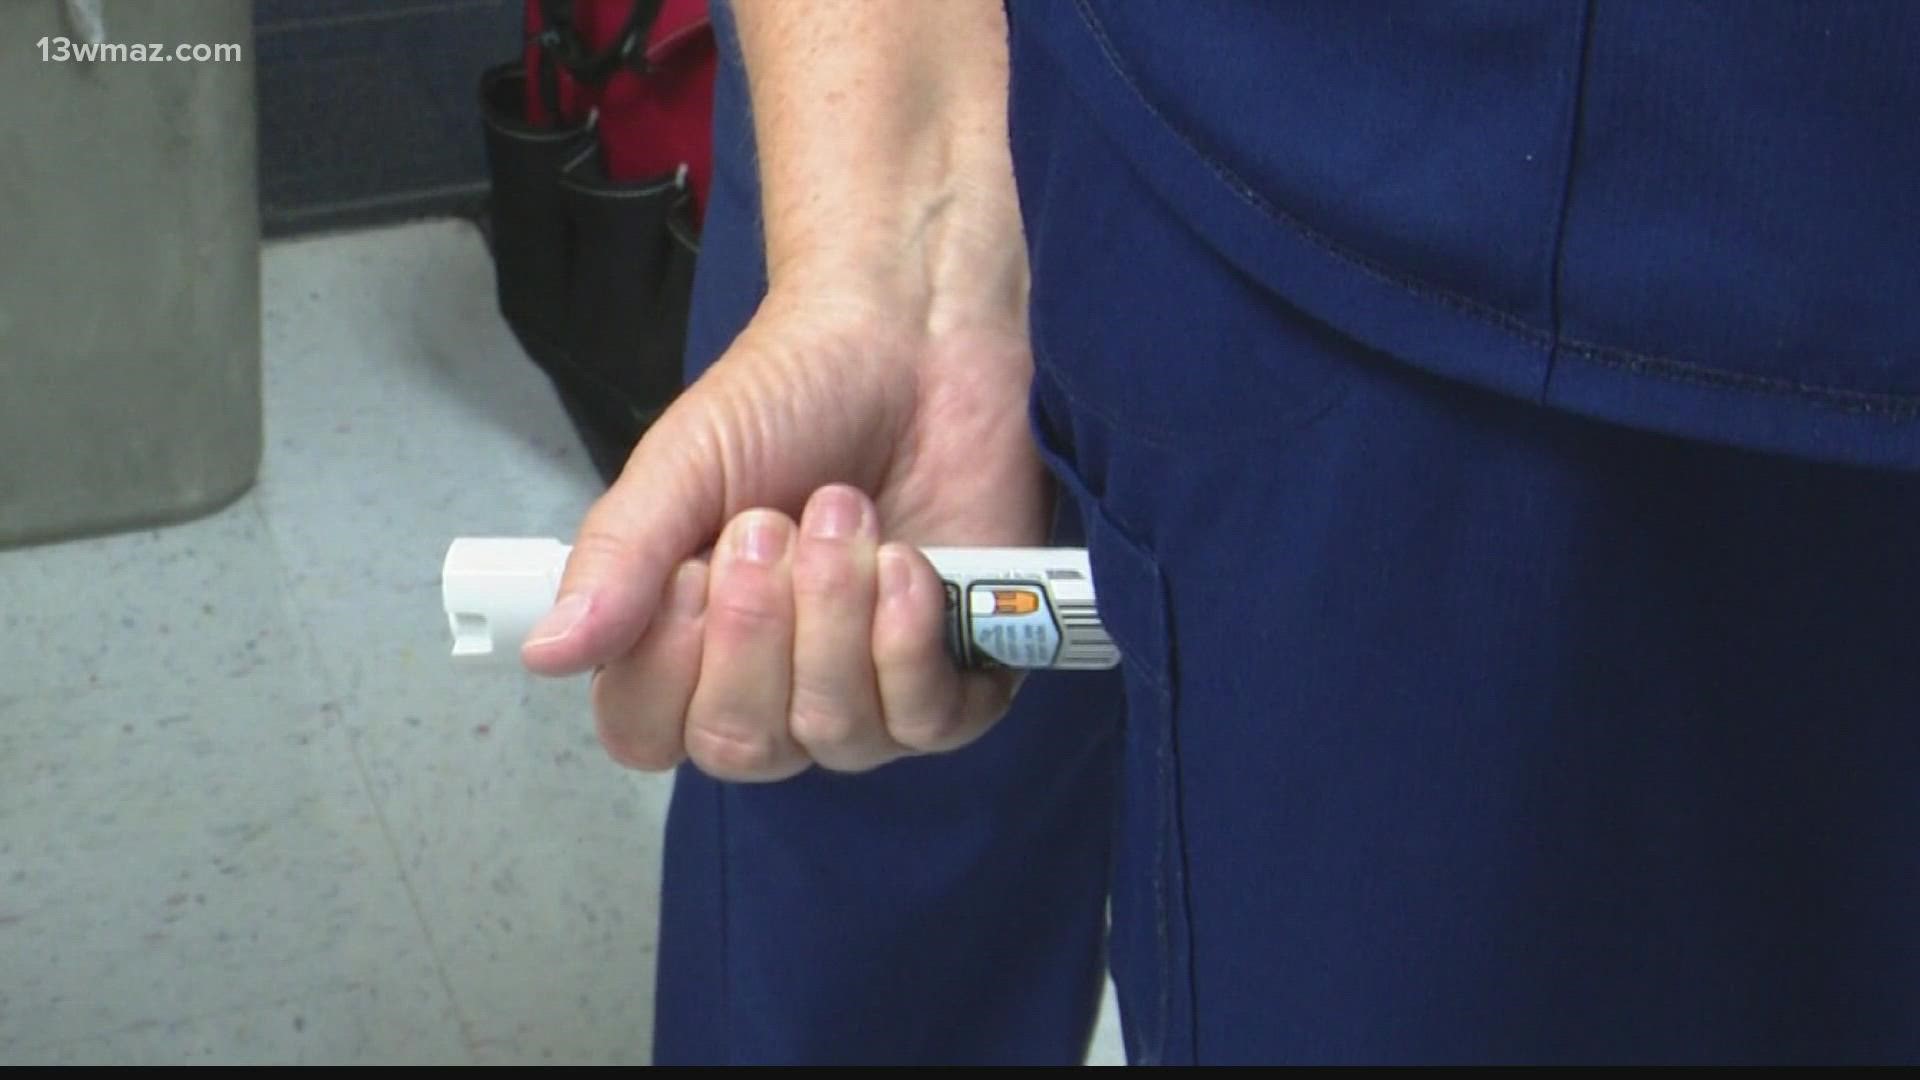 This allows the district to distribute 86 EpiPen's throughout their schools.